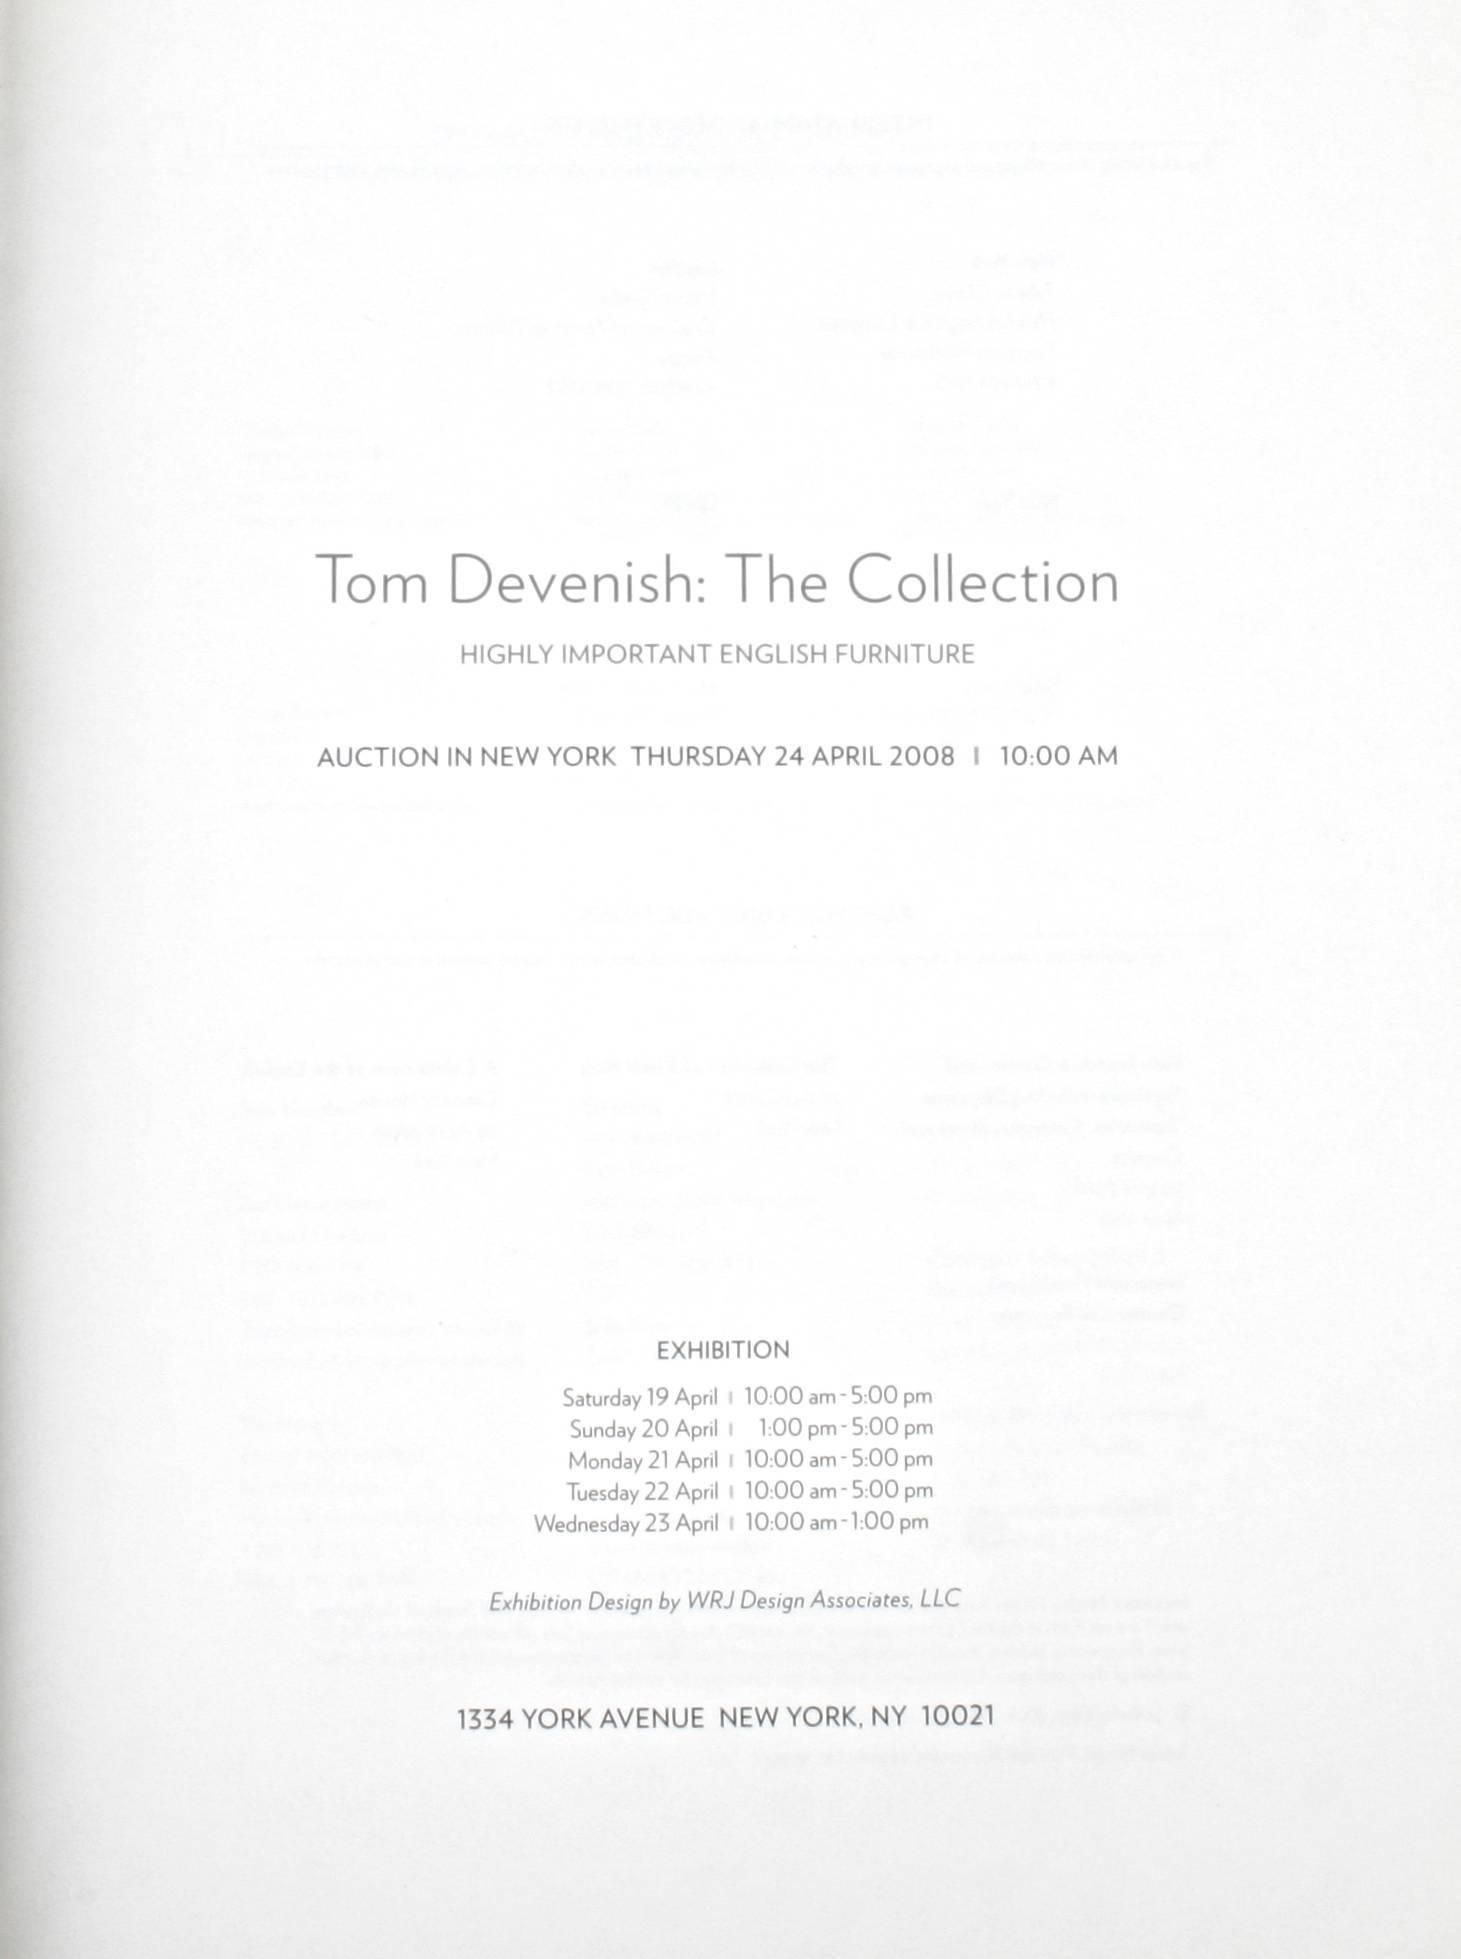 Sotheby's: Tom Devenish Collection of Important English Furniture New York April 2008. First edition softcover. Tom Devenish, was a New York dealer in fine English furniture who died in 2002, had a large collection of 18th c antiques. He also was